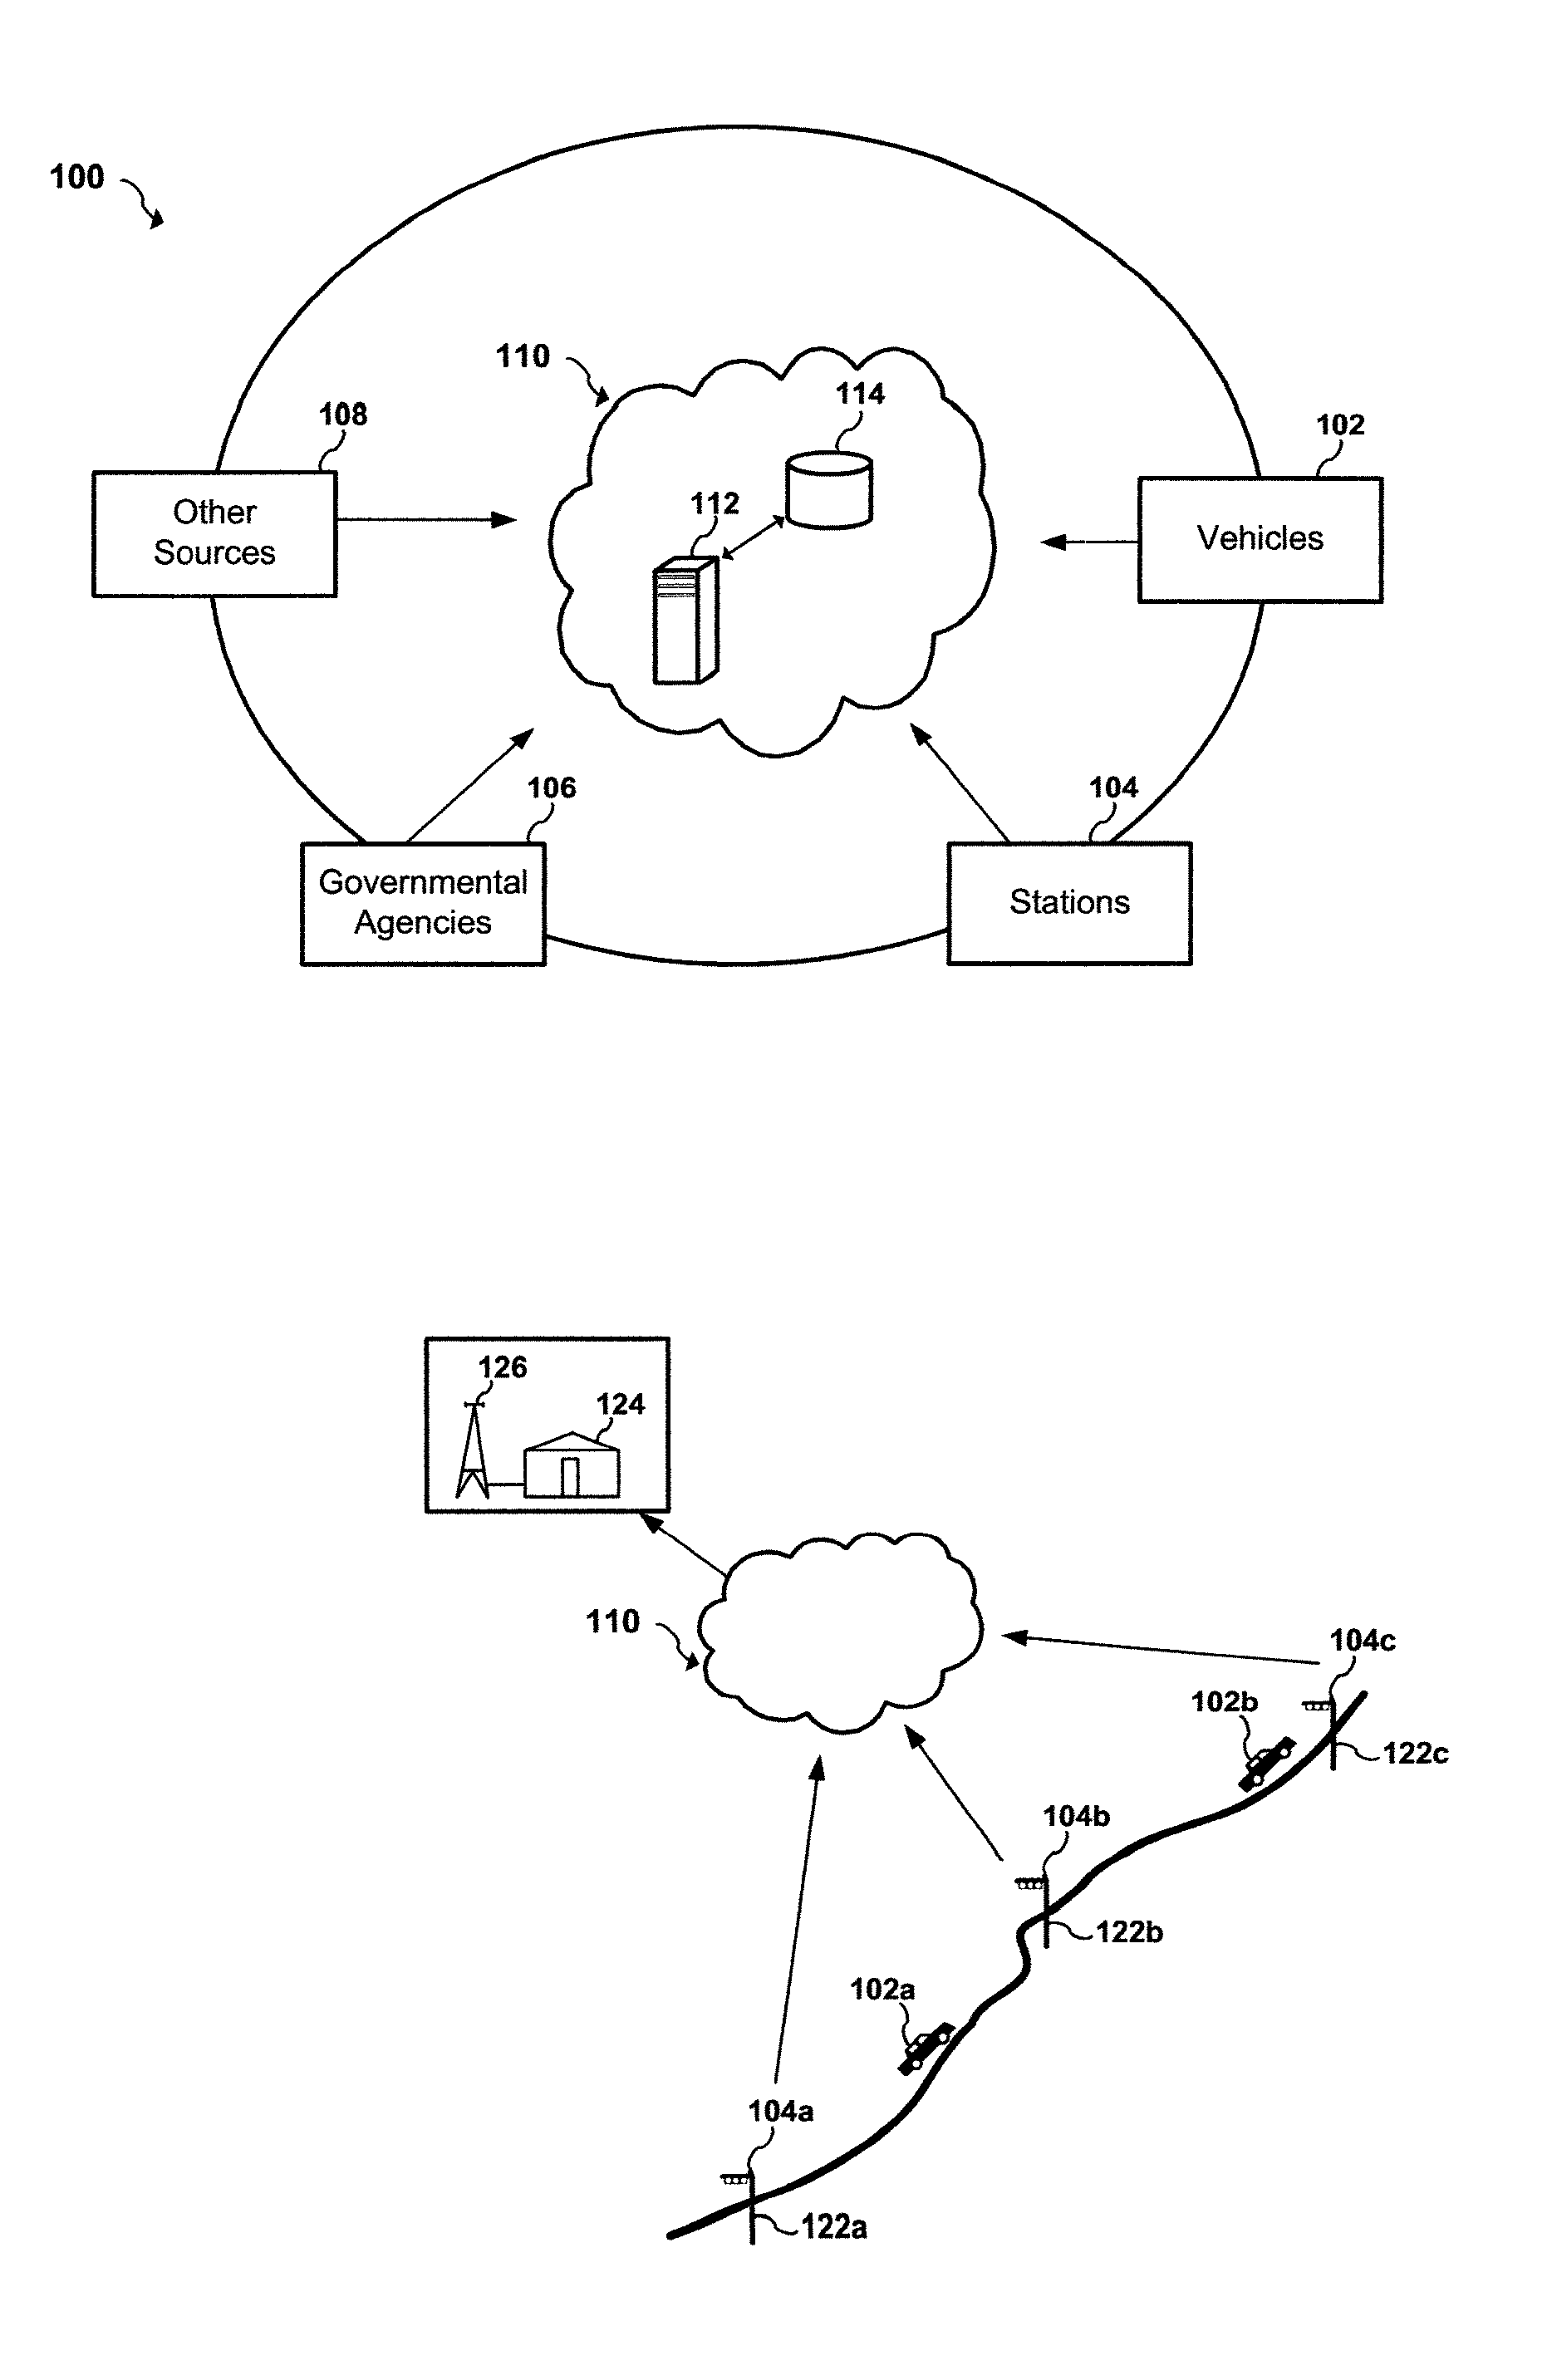 Apparatus and system to manage monitored vehicular flow rate